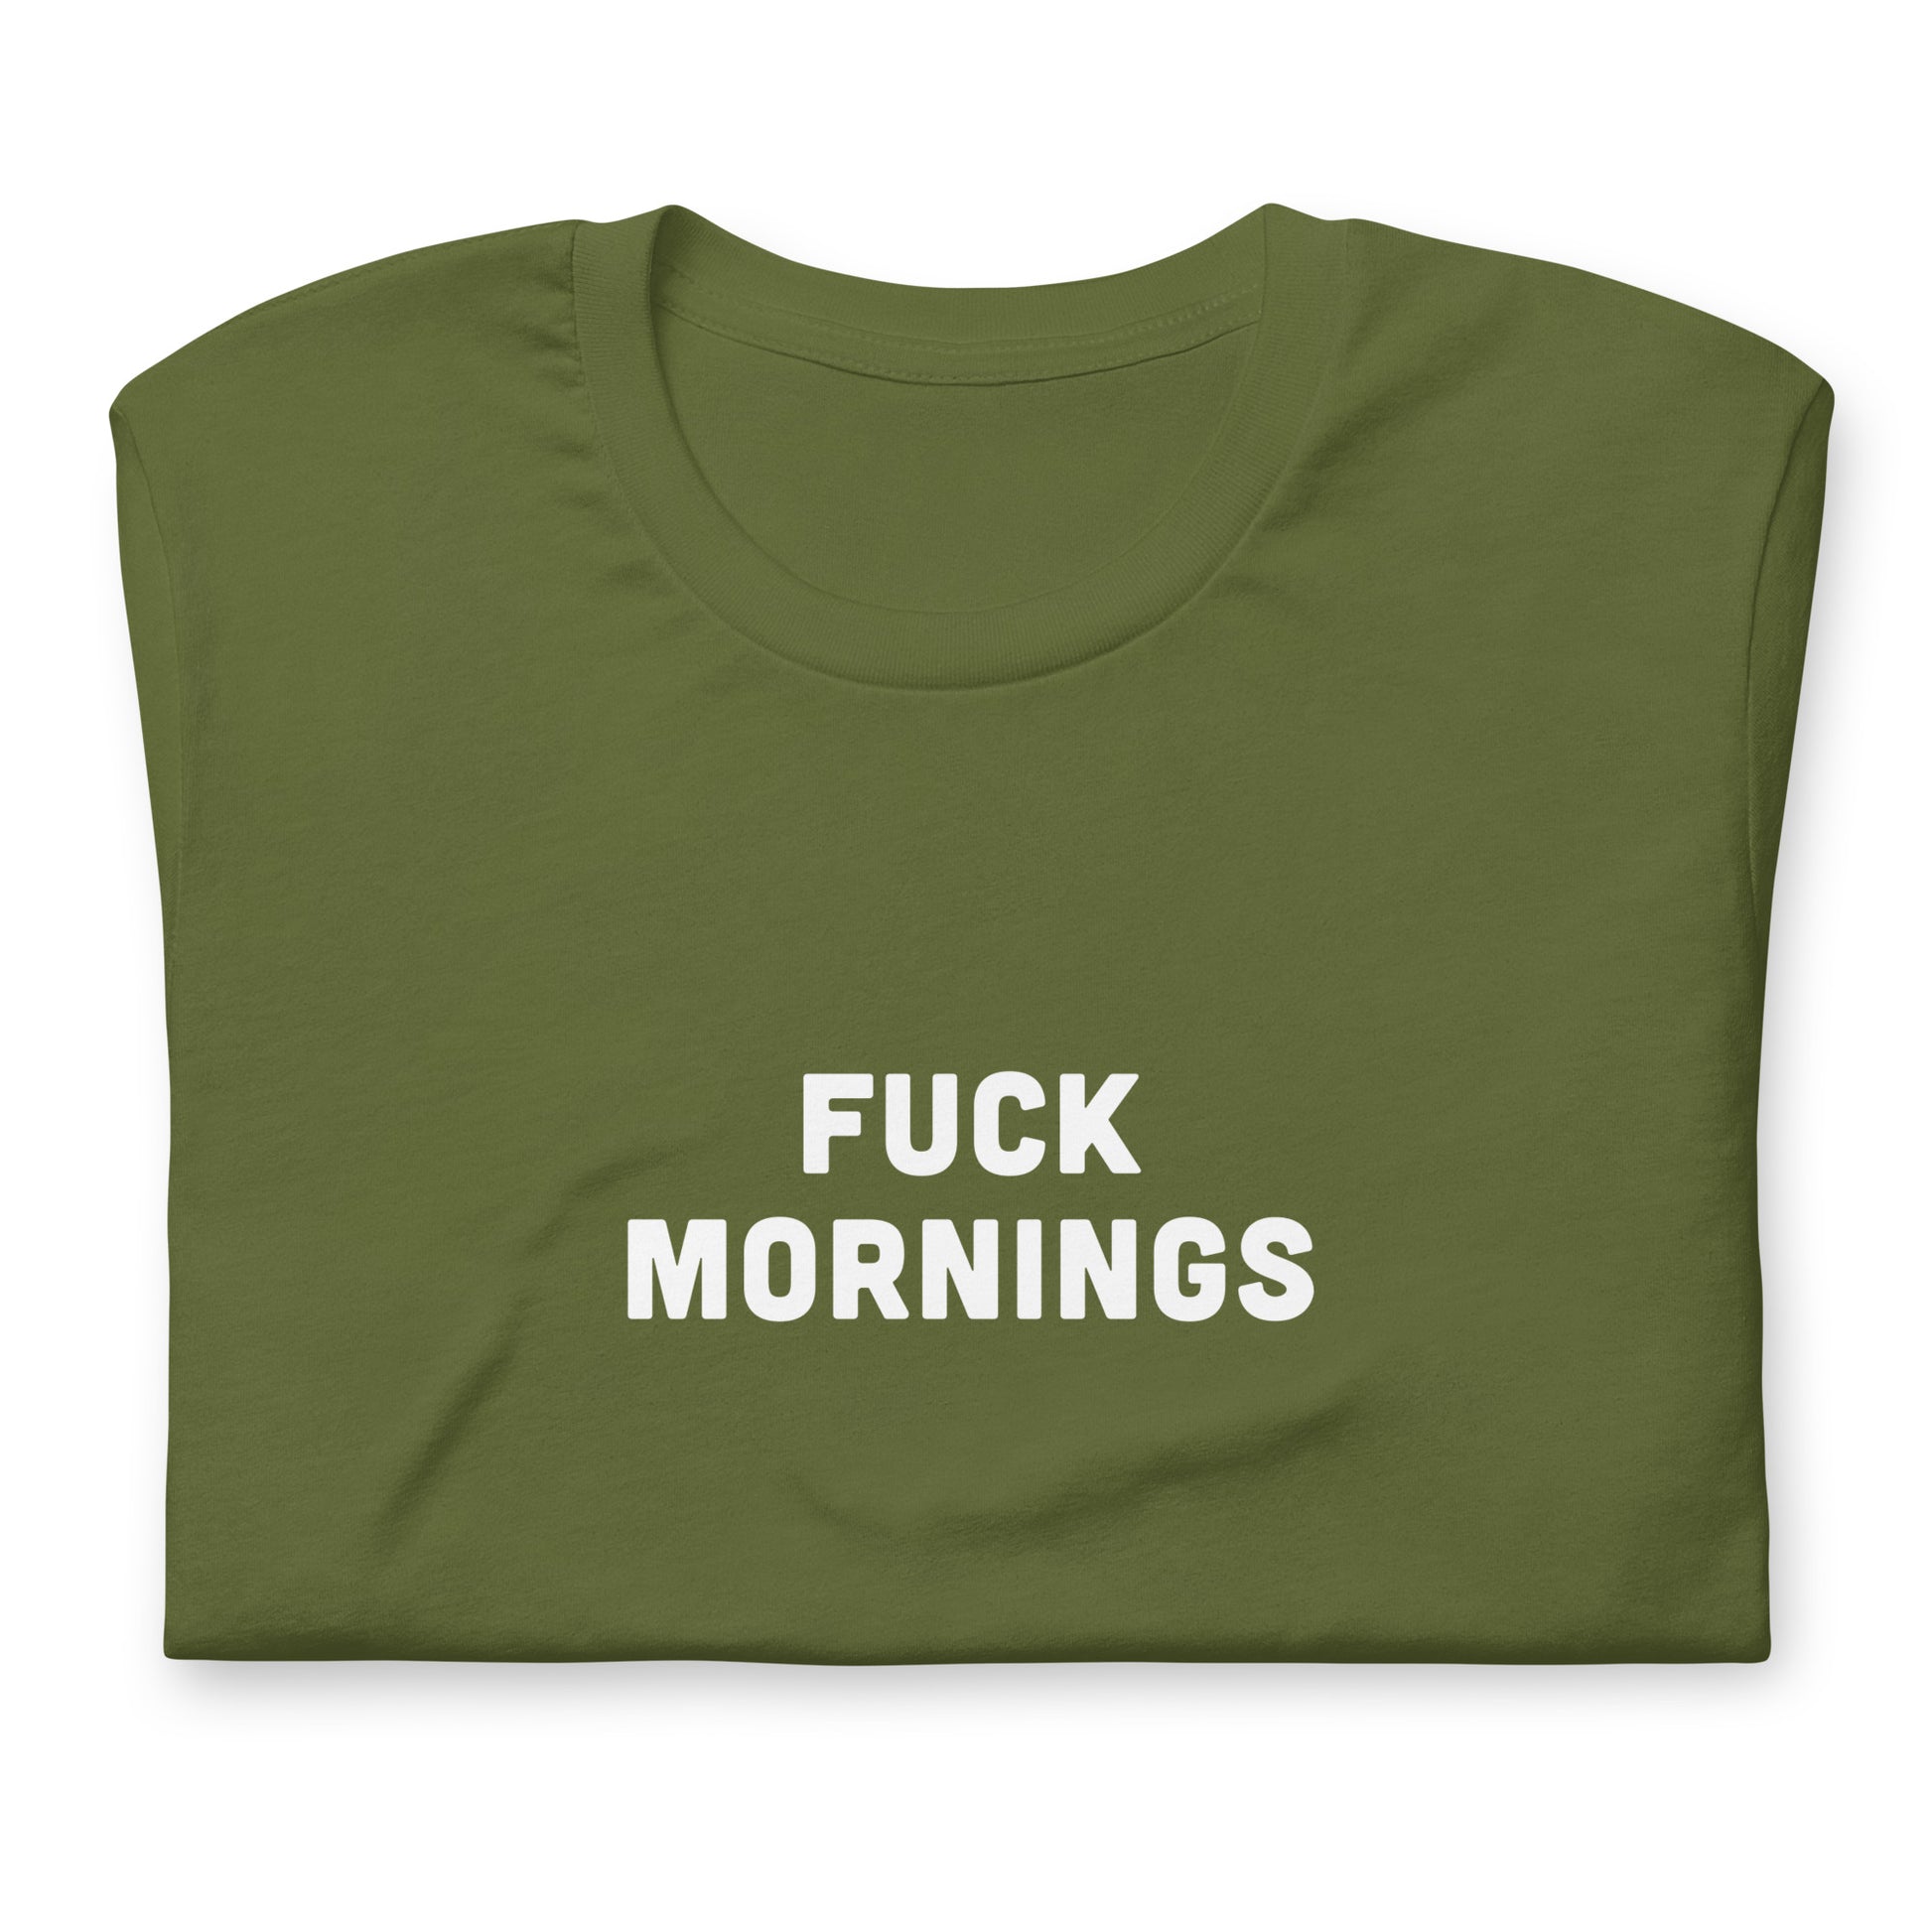 Fuck Mornings T-Shirt Size M Color Navy